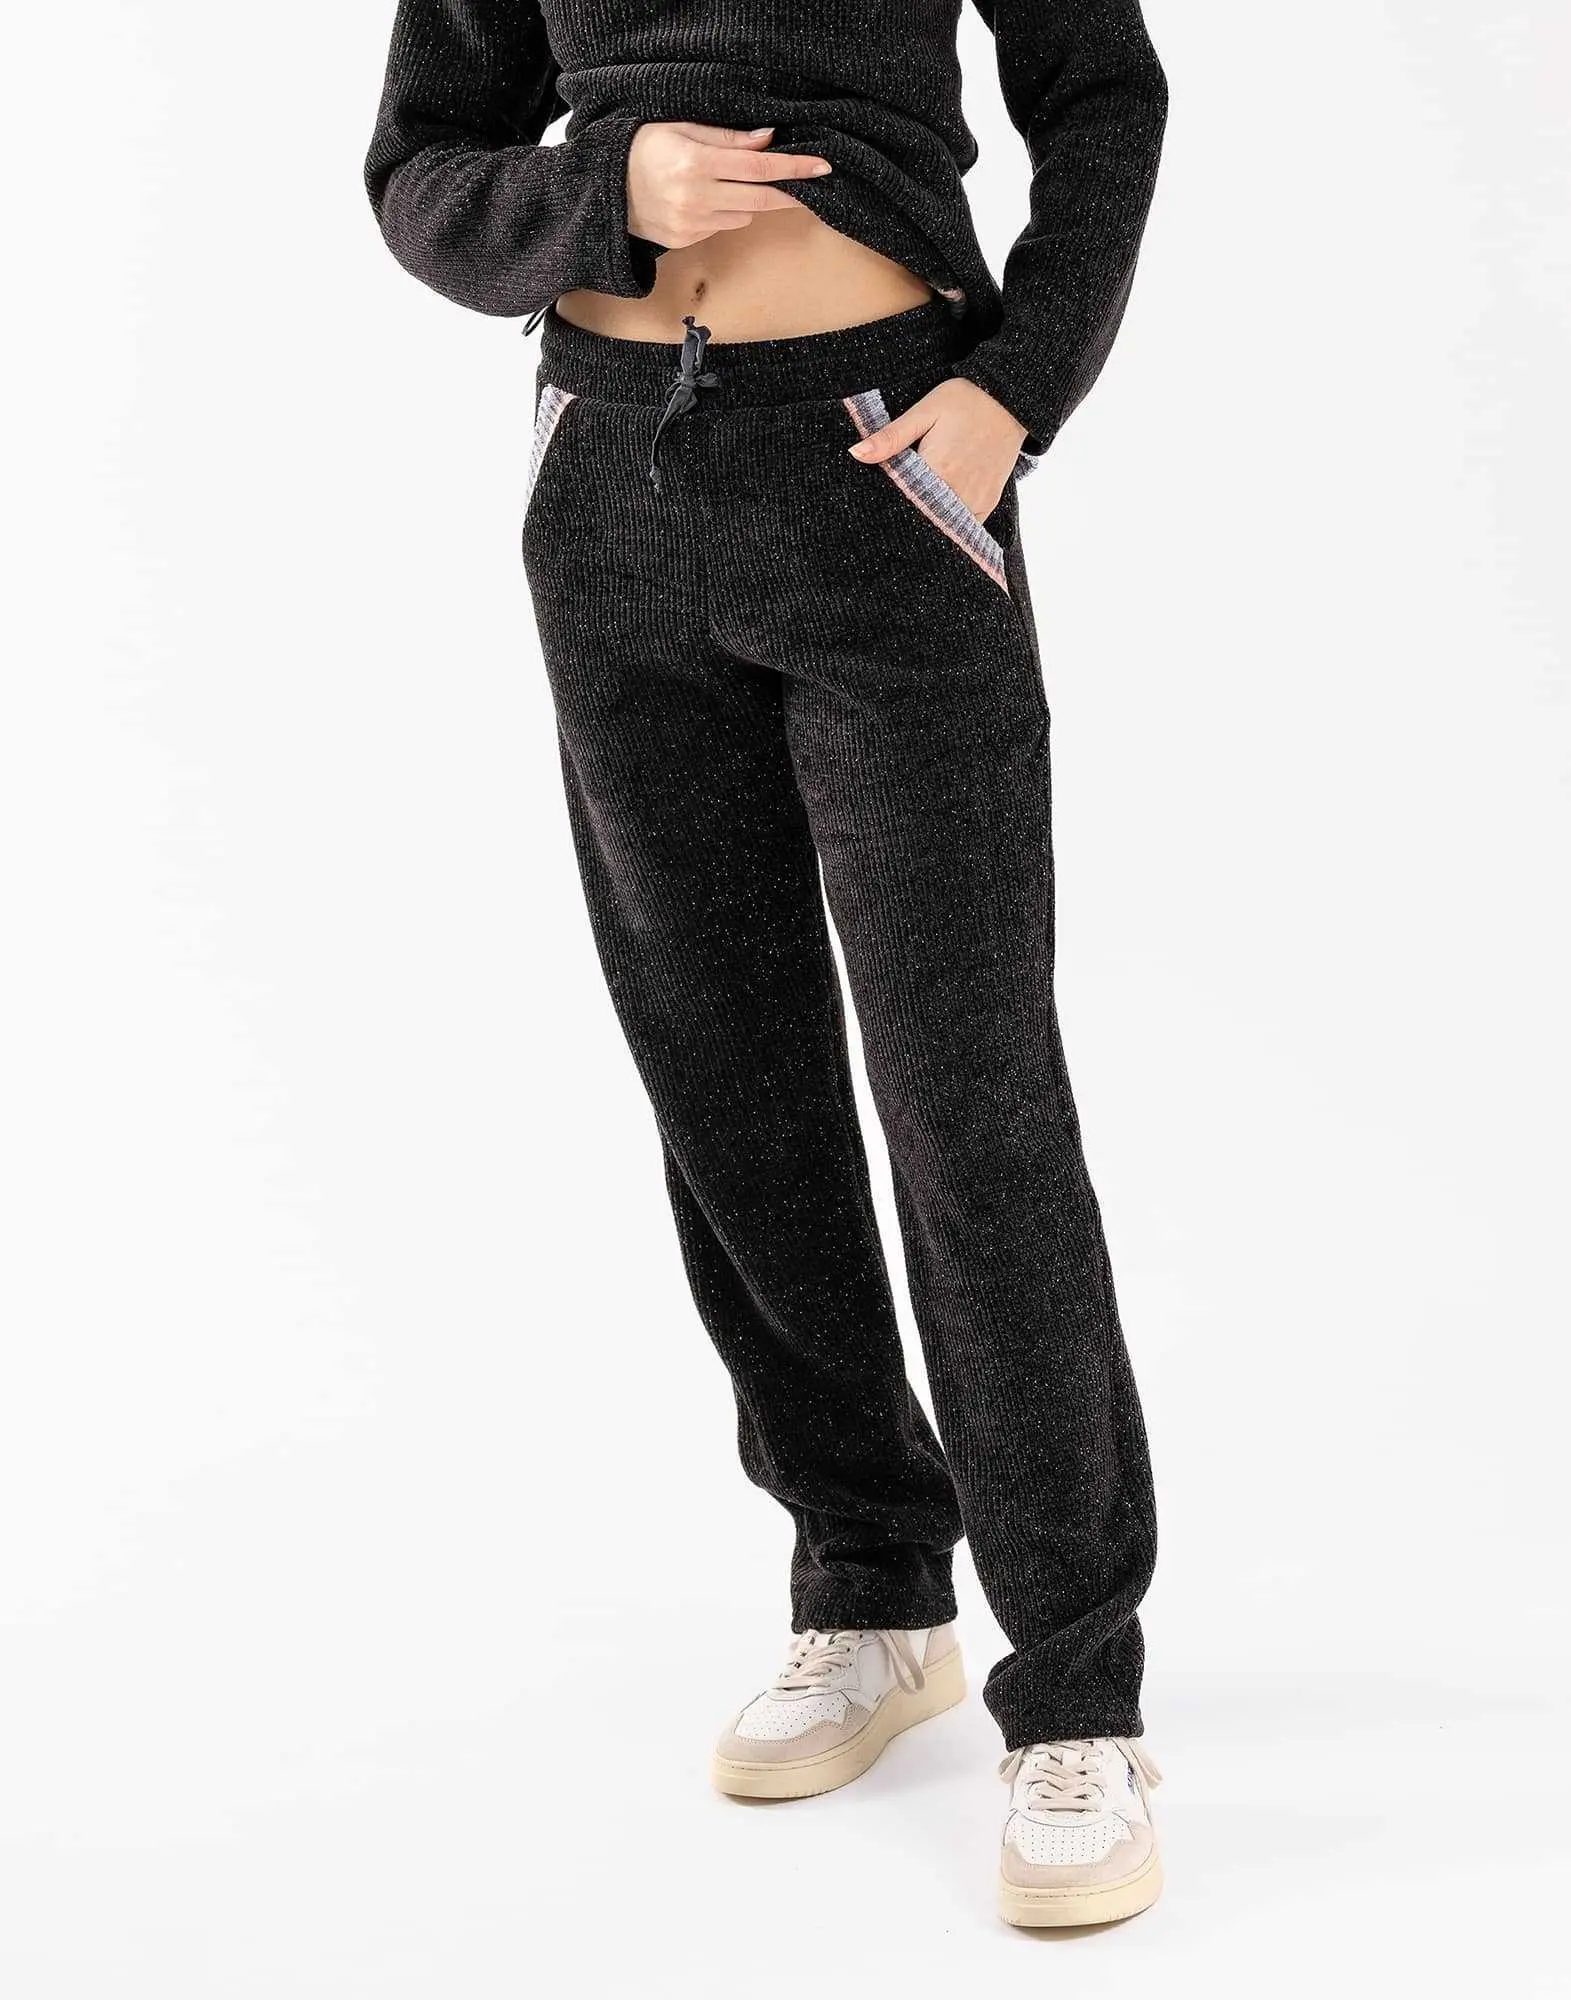 Jogger-style trousers in chenille knit with lurex ICONIC 680 noir | Lingerie le Chat